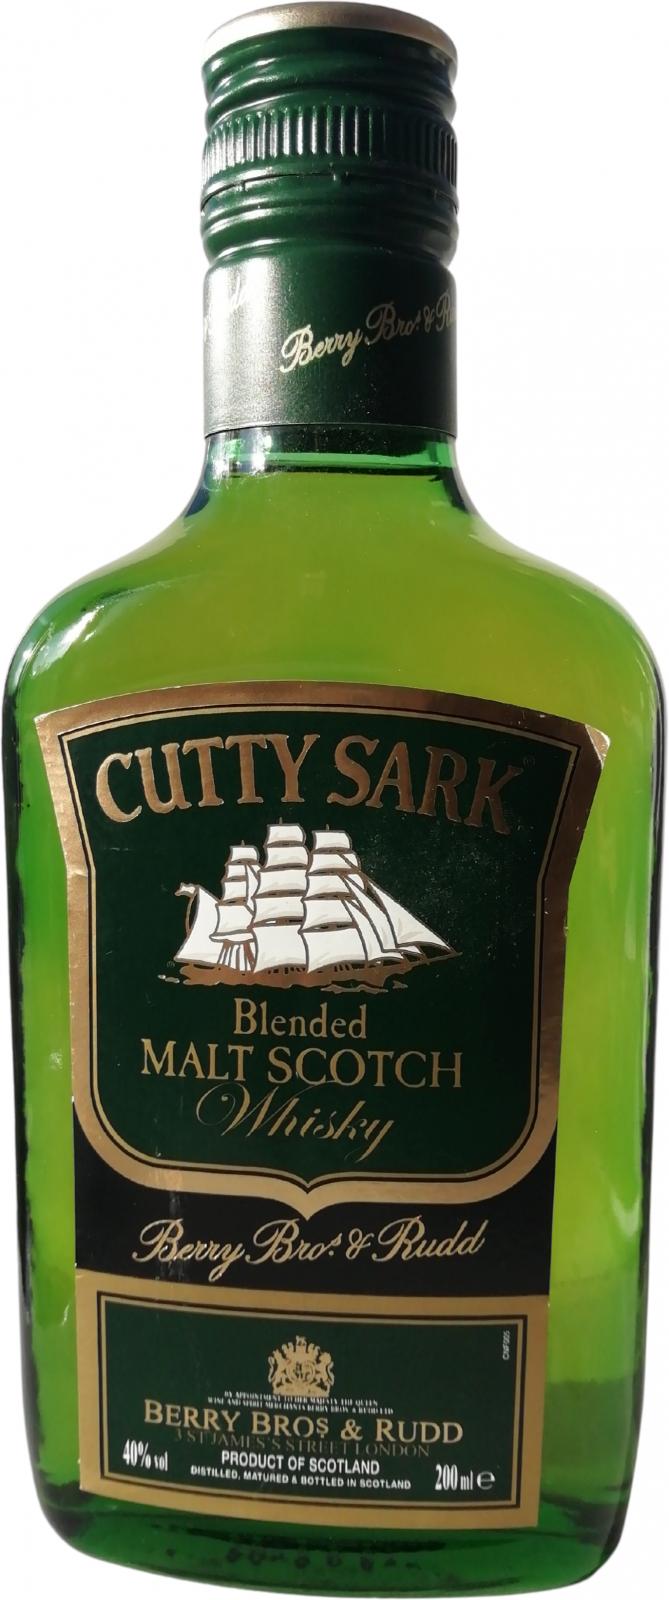 Cutty Sark Blended Malt Scotch Whisky - Ratings and reviews